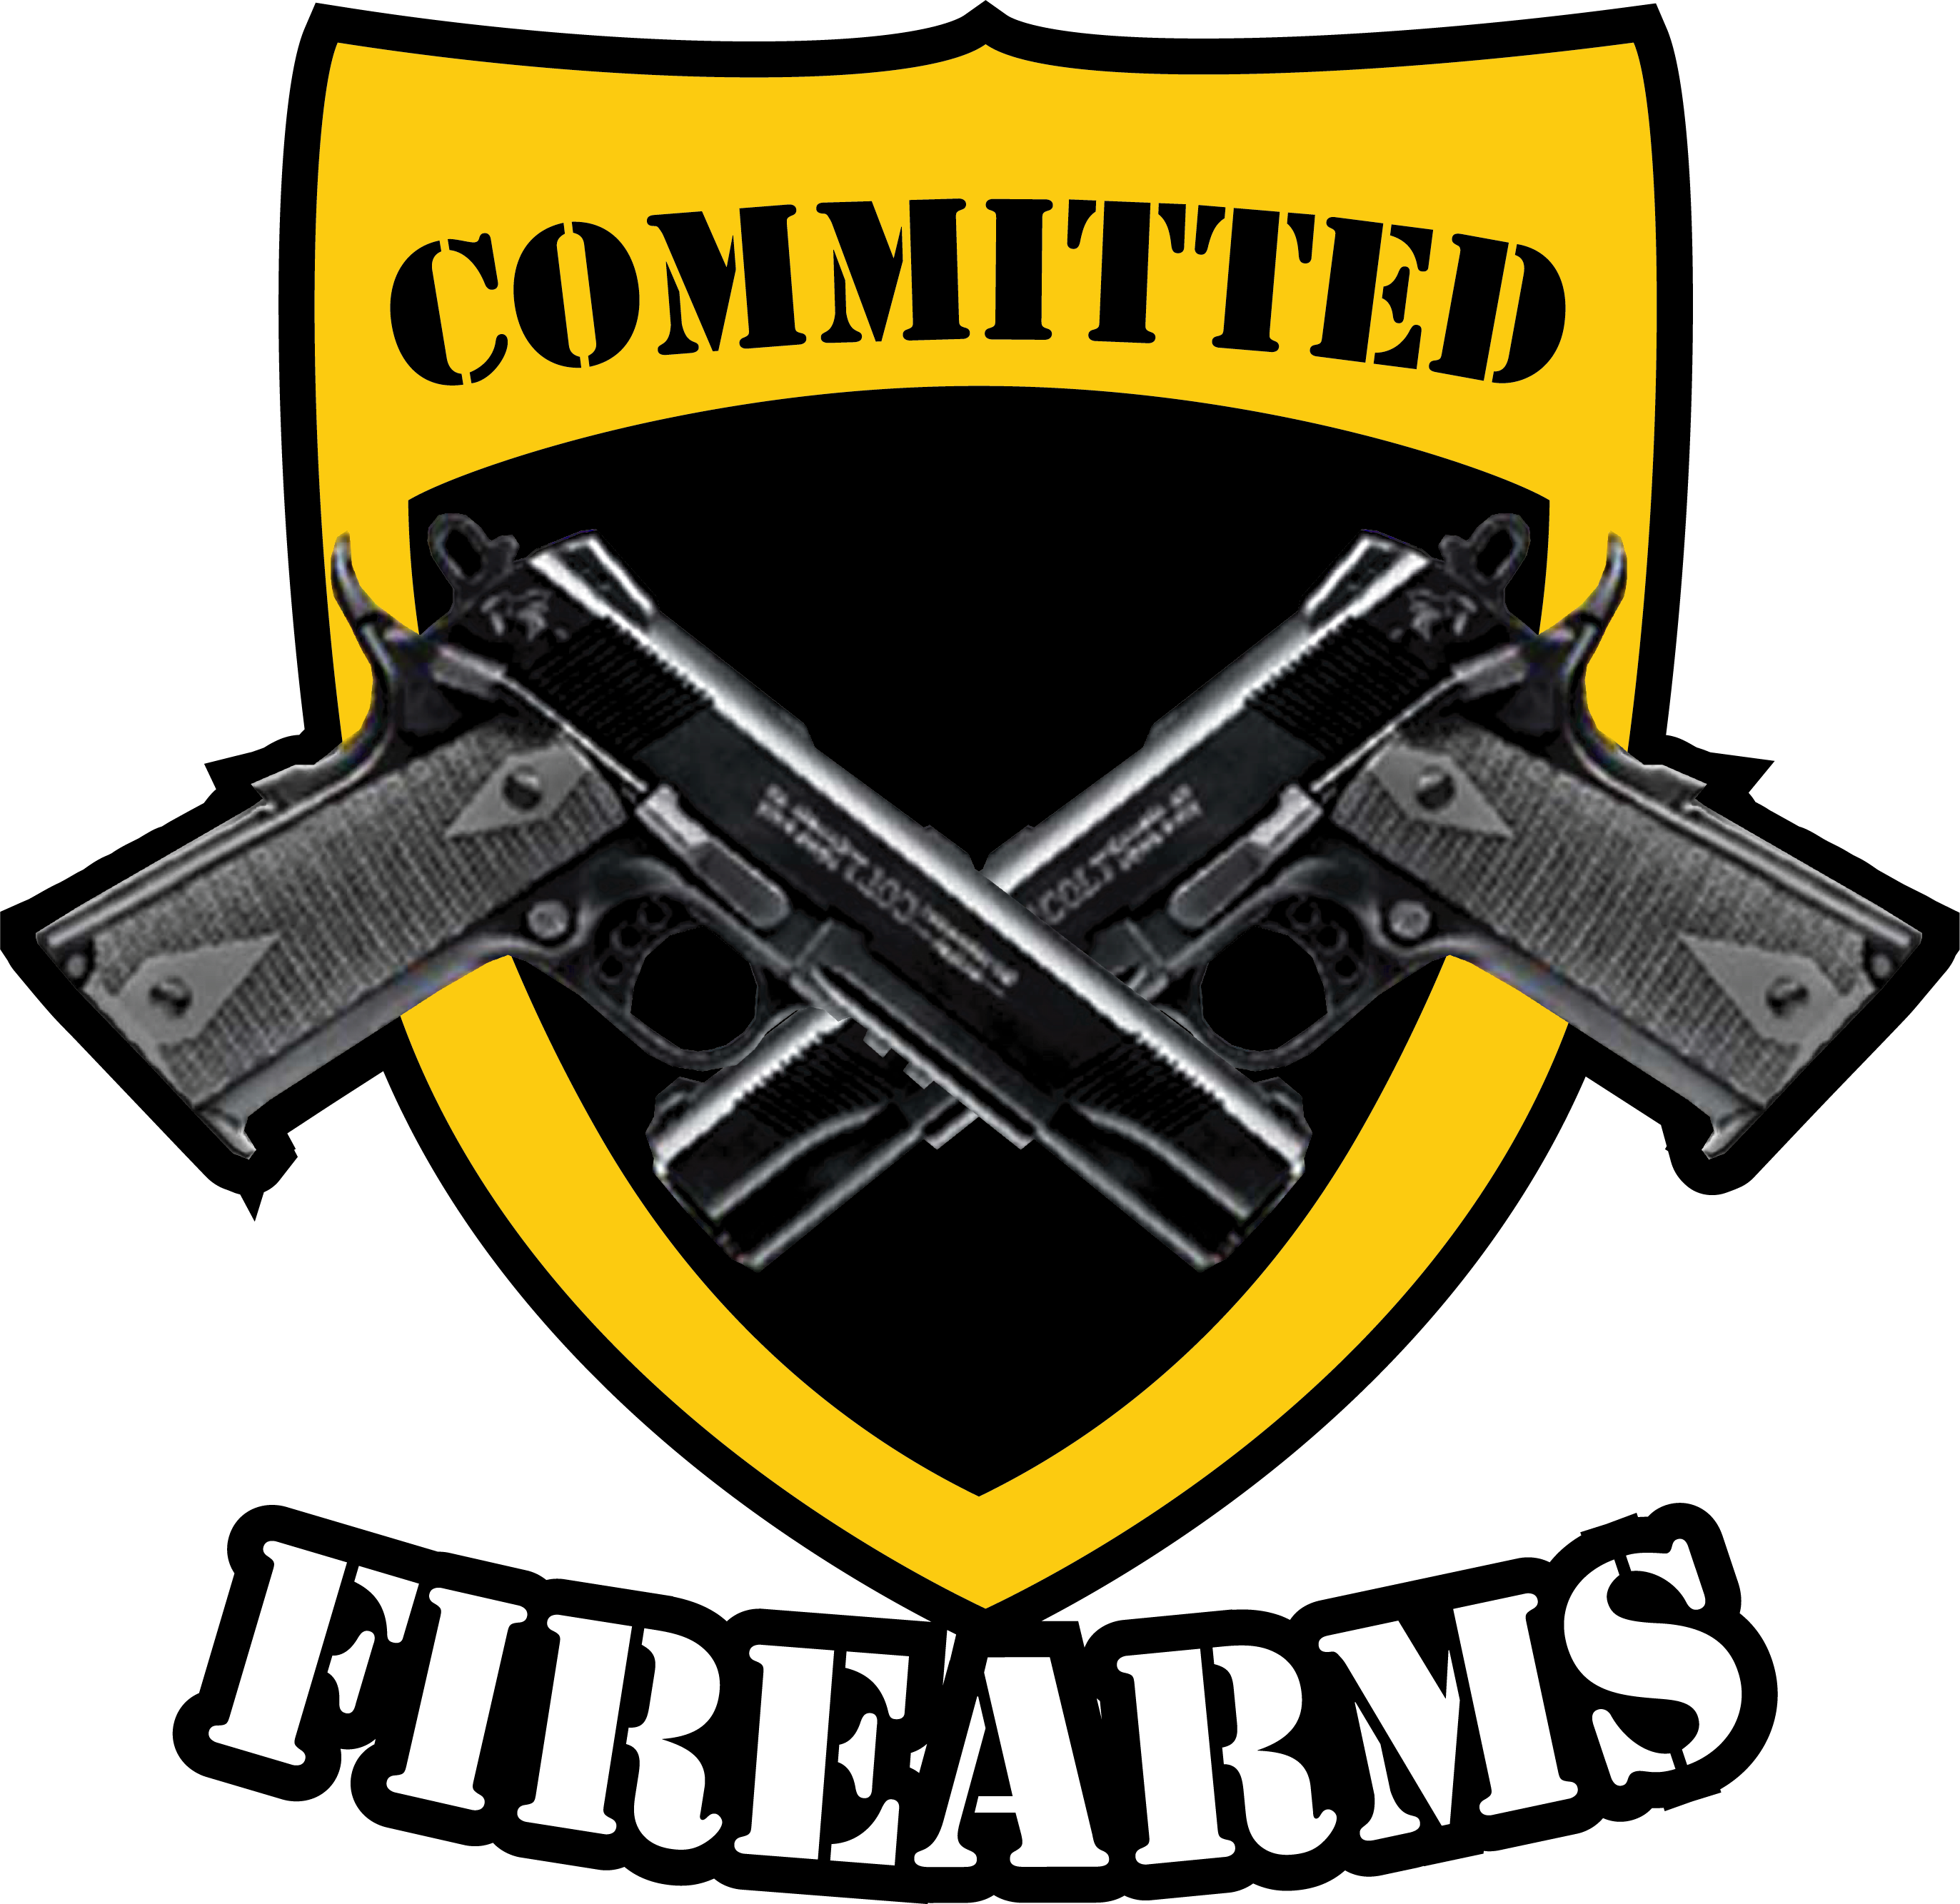 COMMITTED FIREARMS SDN BHD